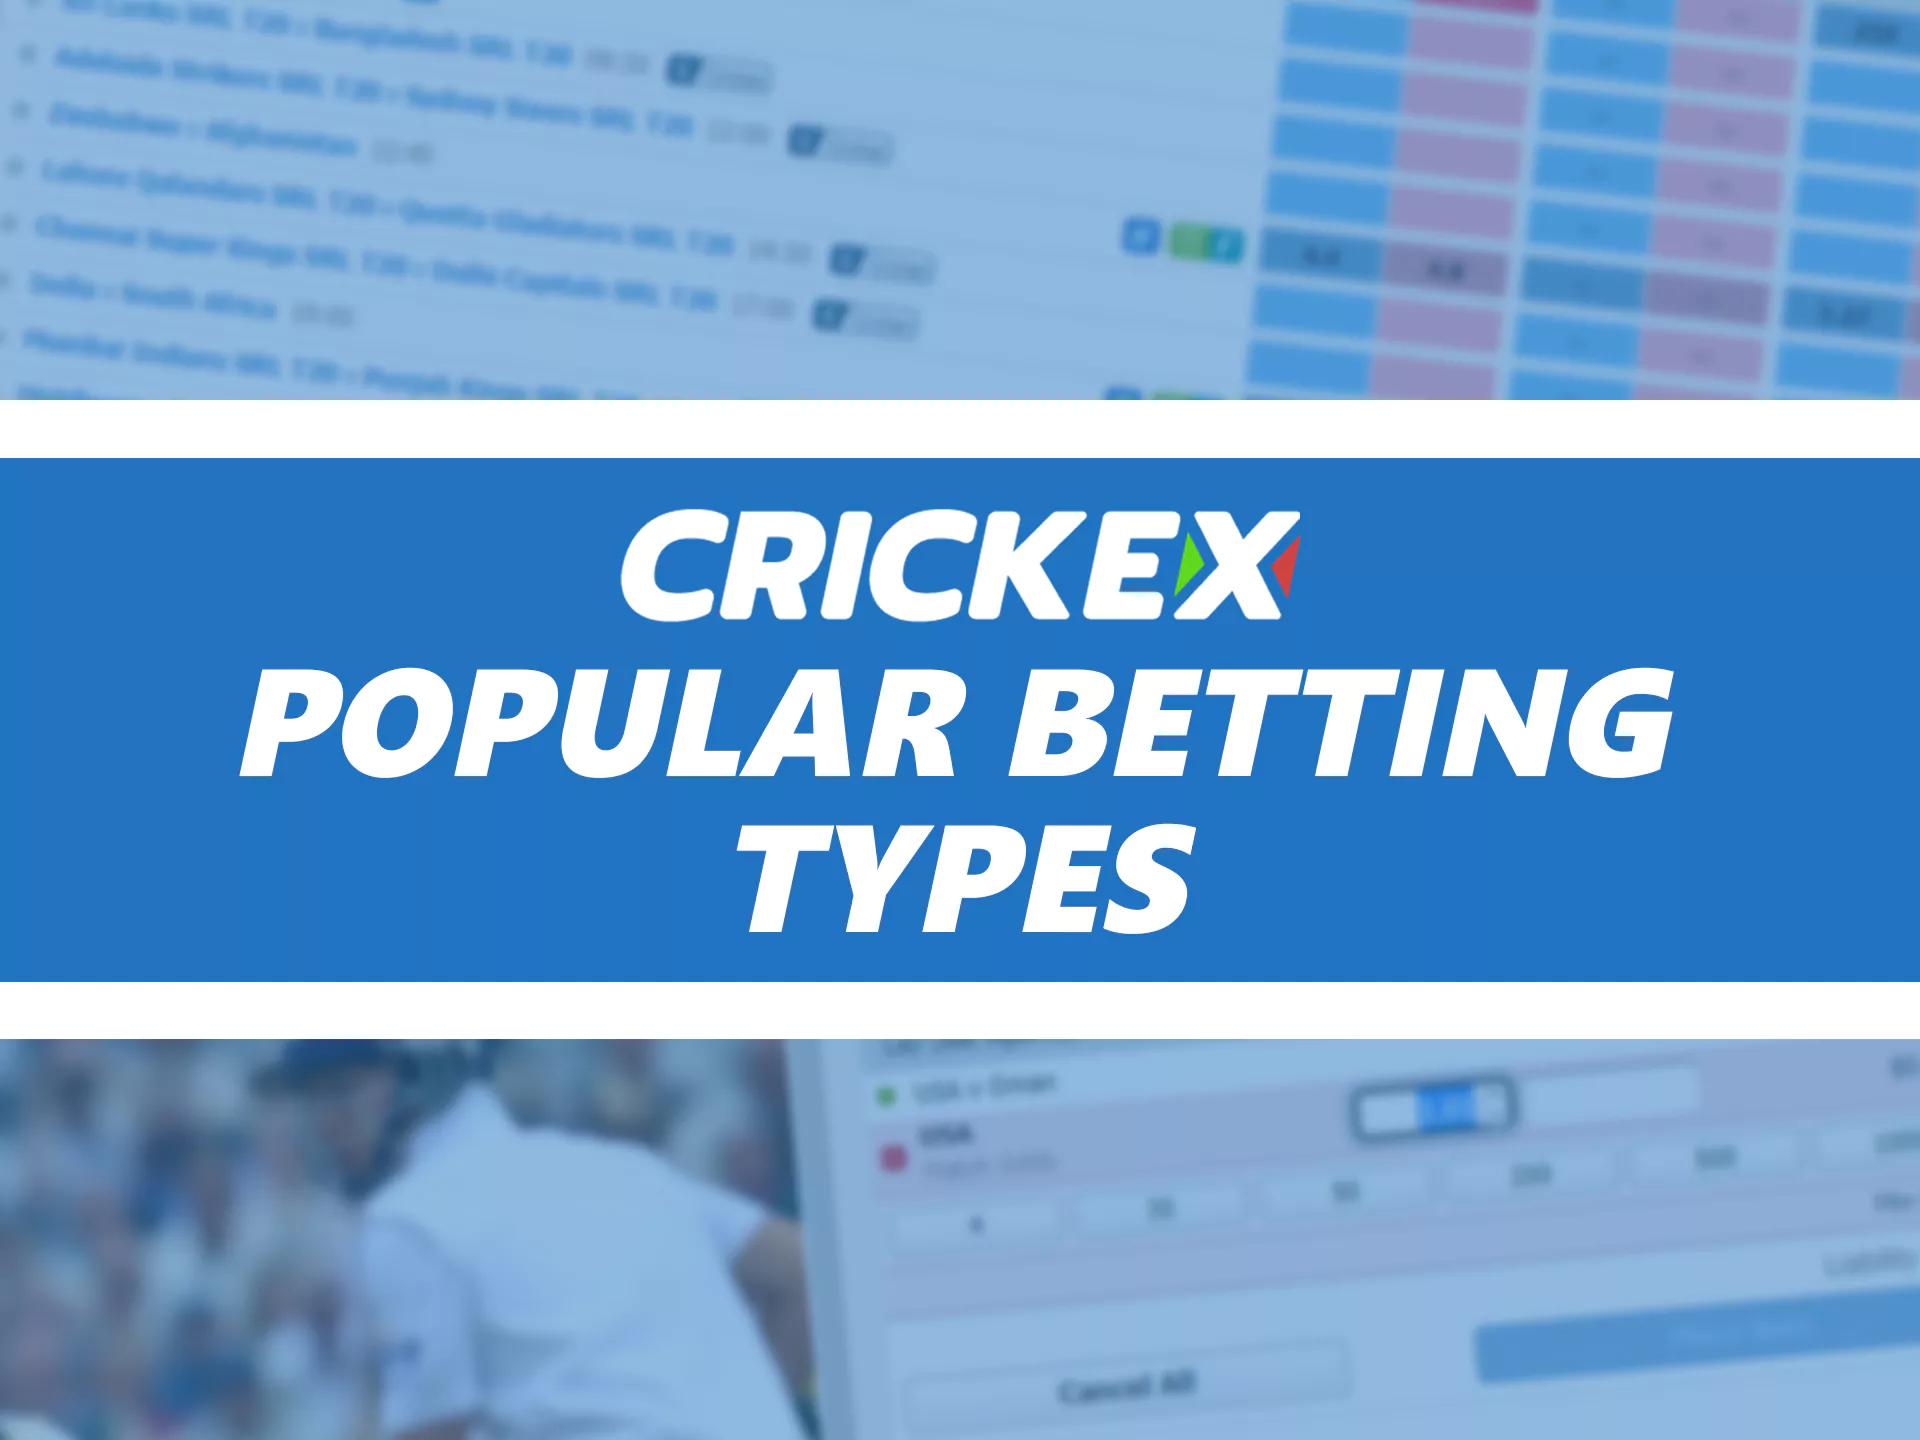 You have different option for betting at Crickex.